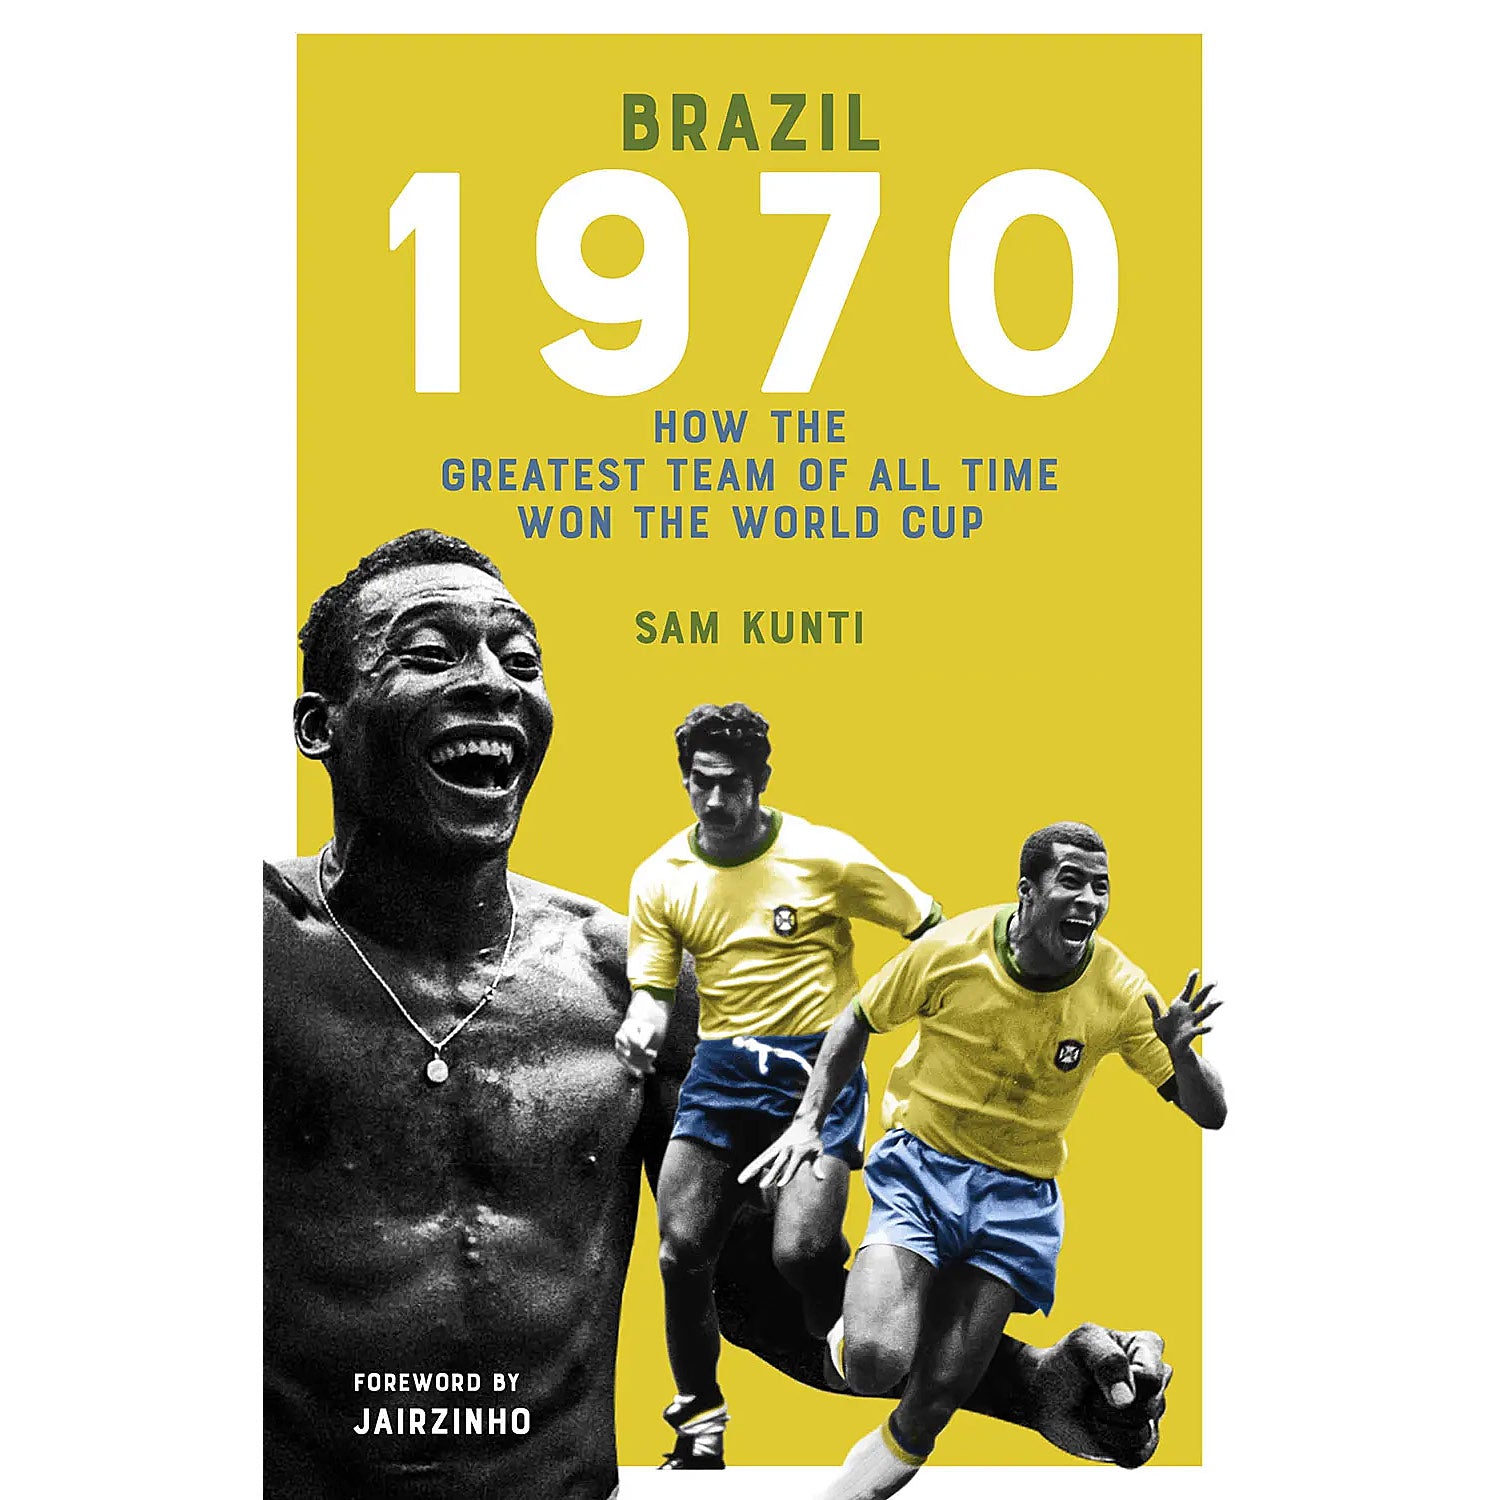 Brazil 1970 – How the Greatest Team of All Time Won the World Cup